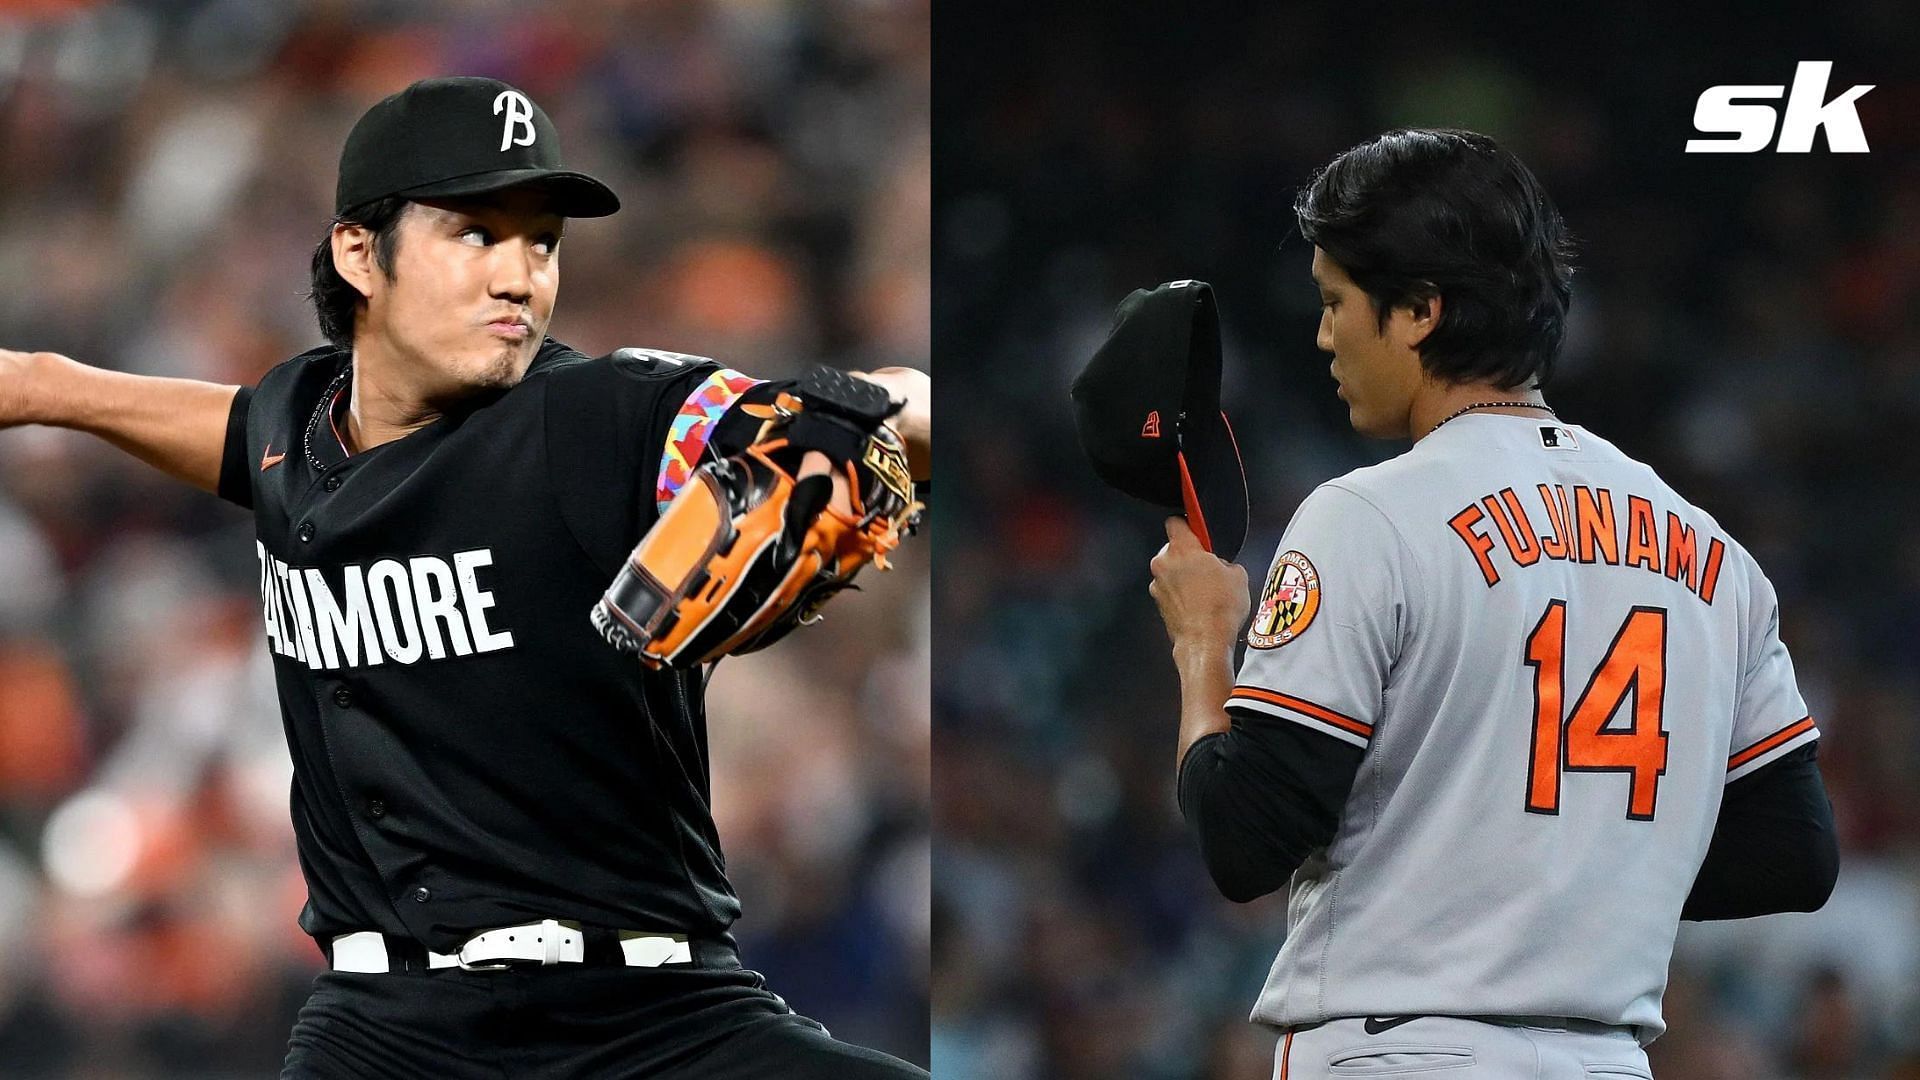 The New York Mets haee agreed to terms with free agent pitcher Shintaro Fujinami